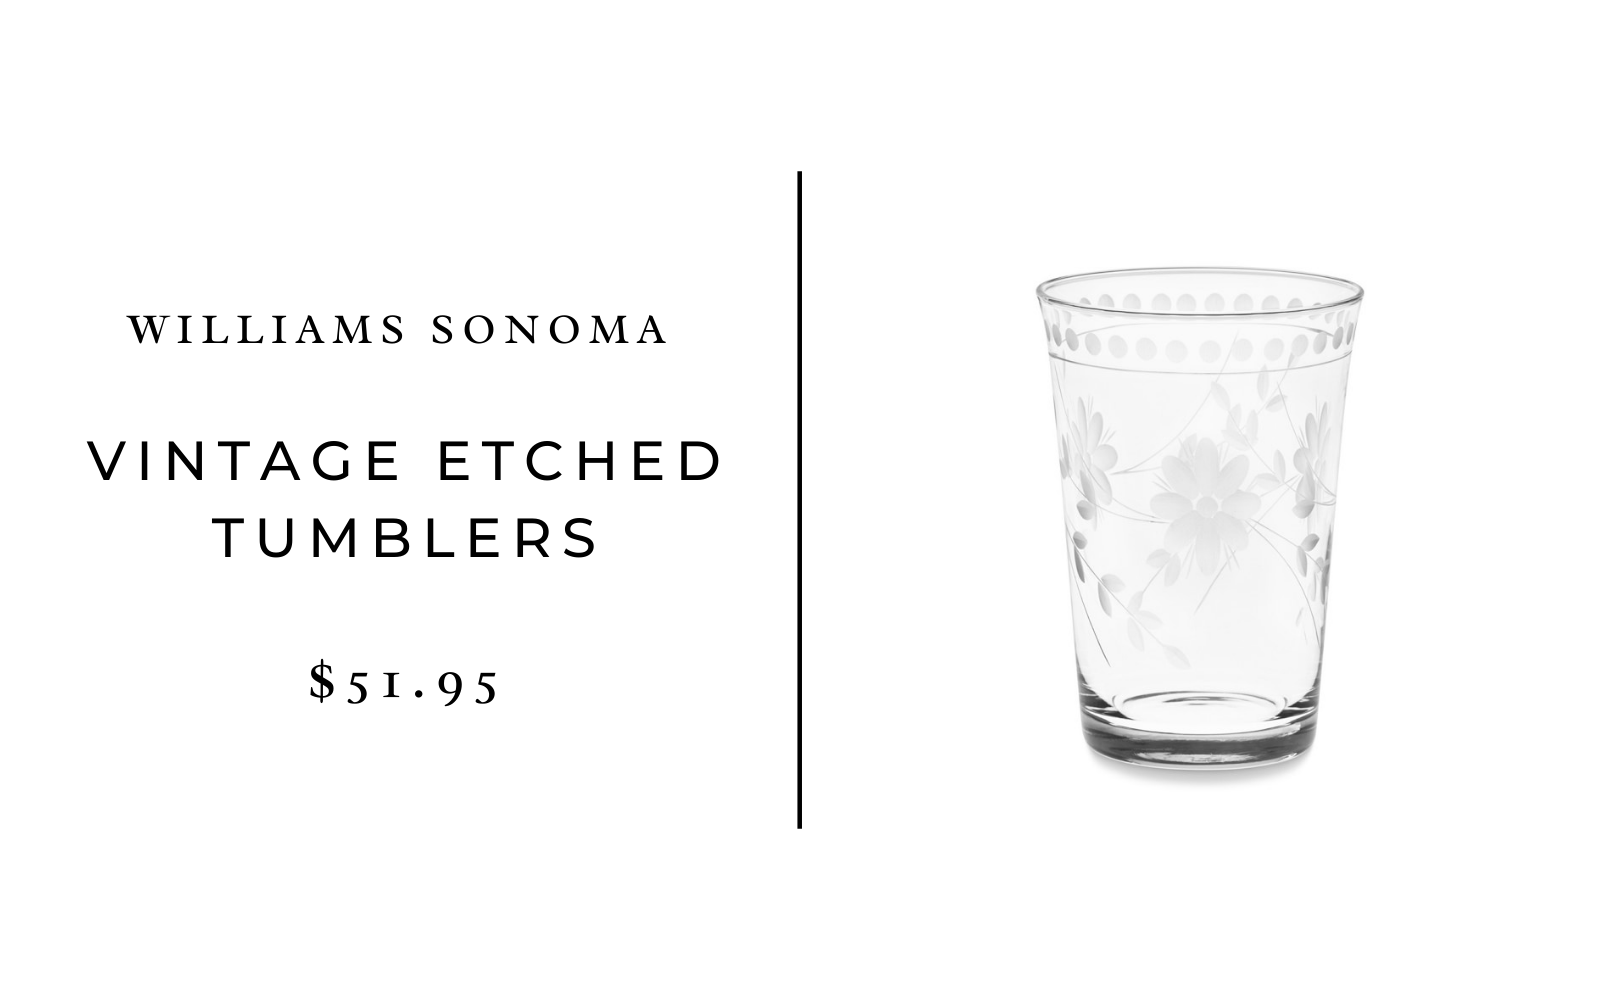 williams sonoma vintage etched tumblers